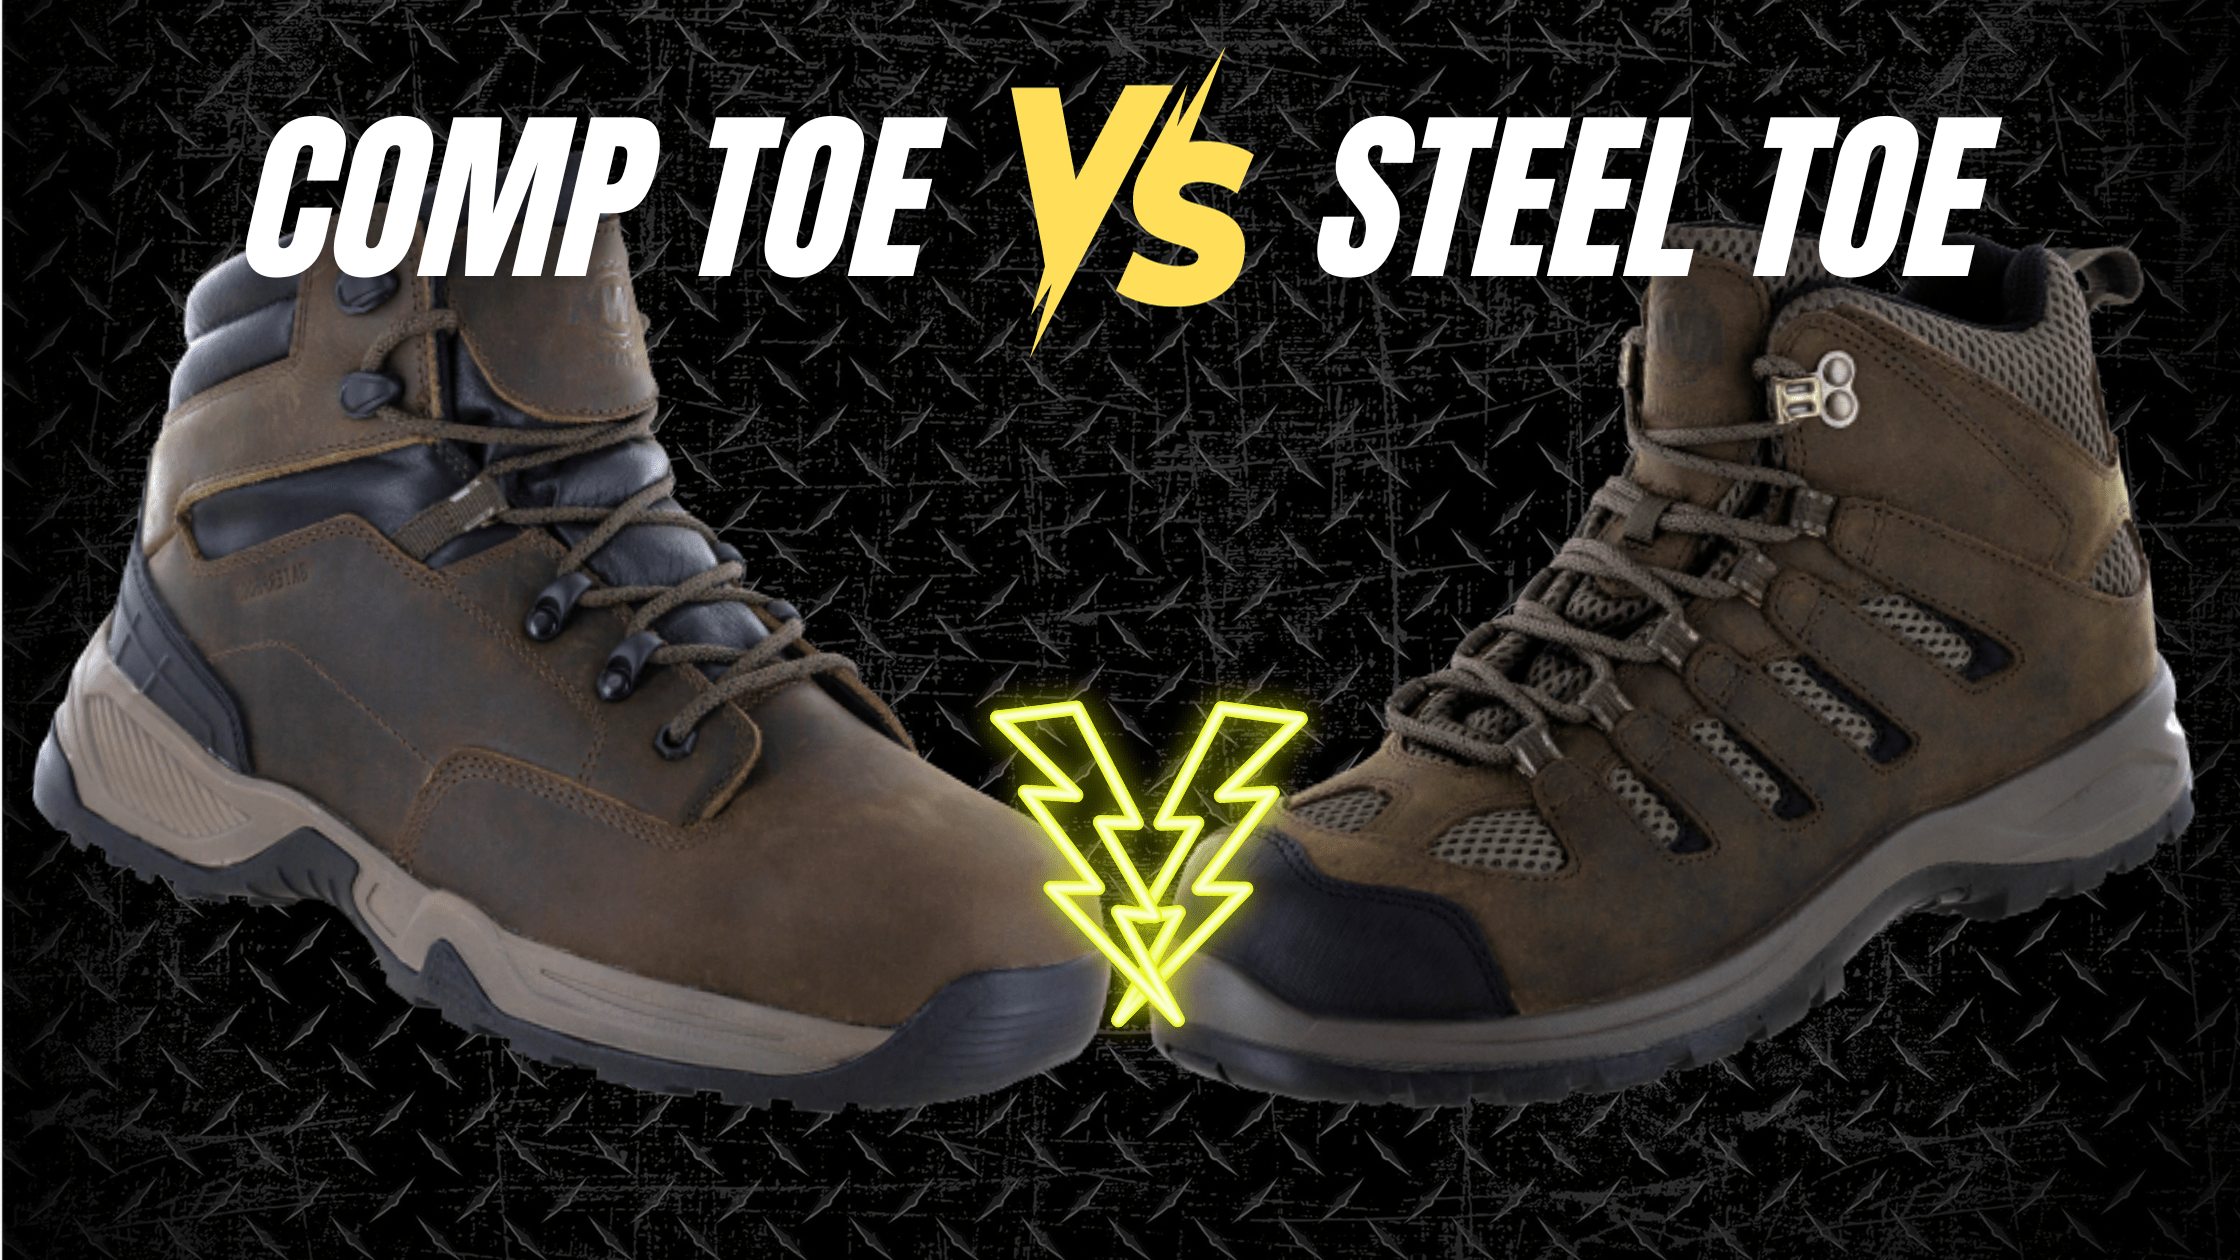 comp toe vs steel toe boots and safety shoes